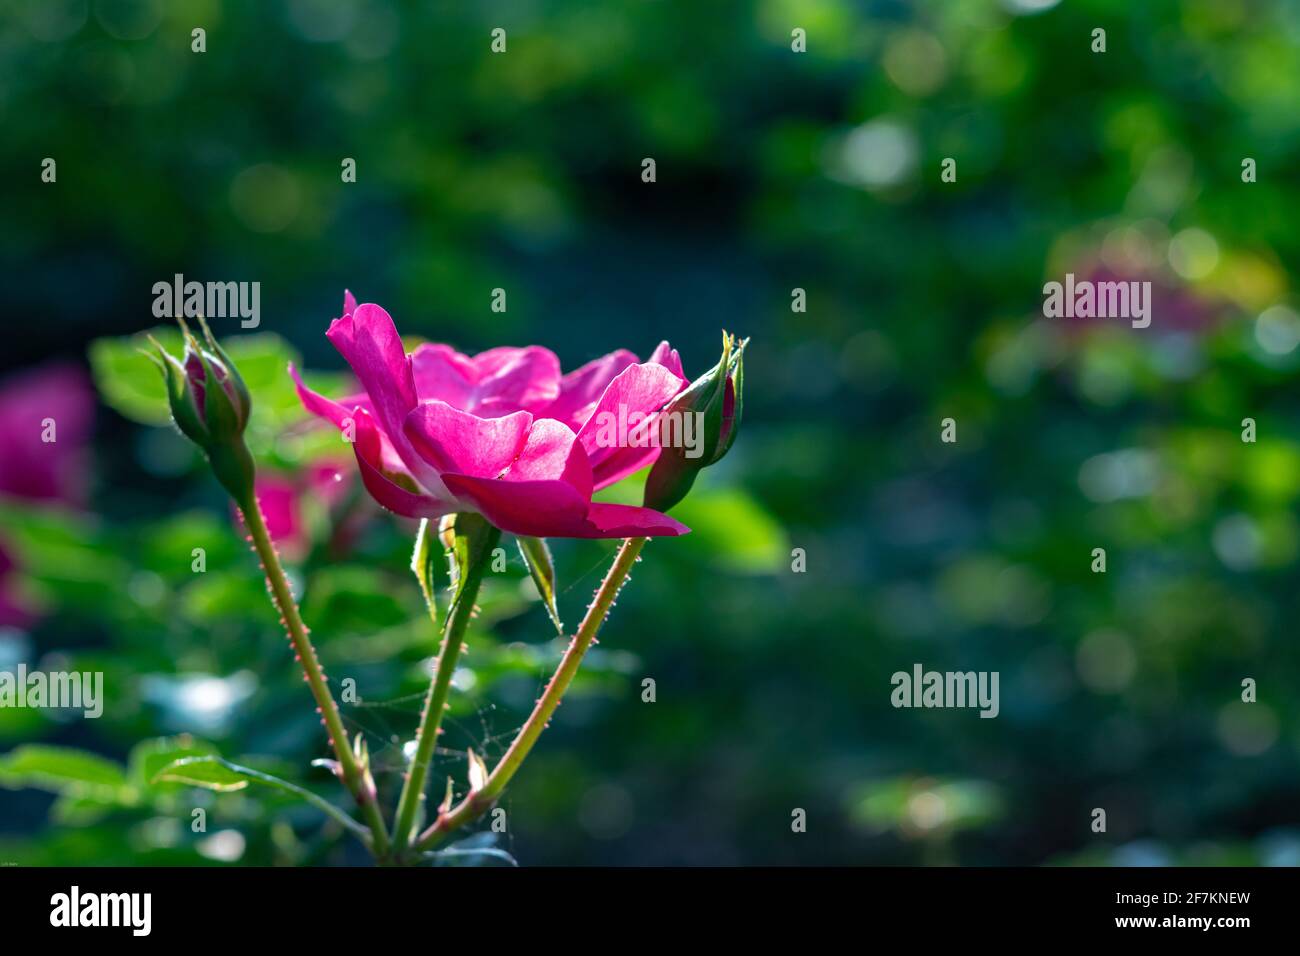 pink rose blossom against green blurred background in summer in Germany Stock Photo